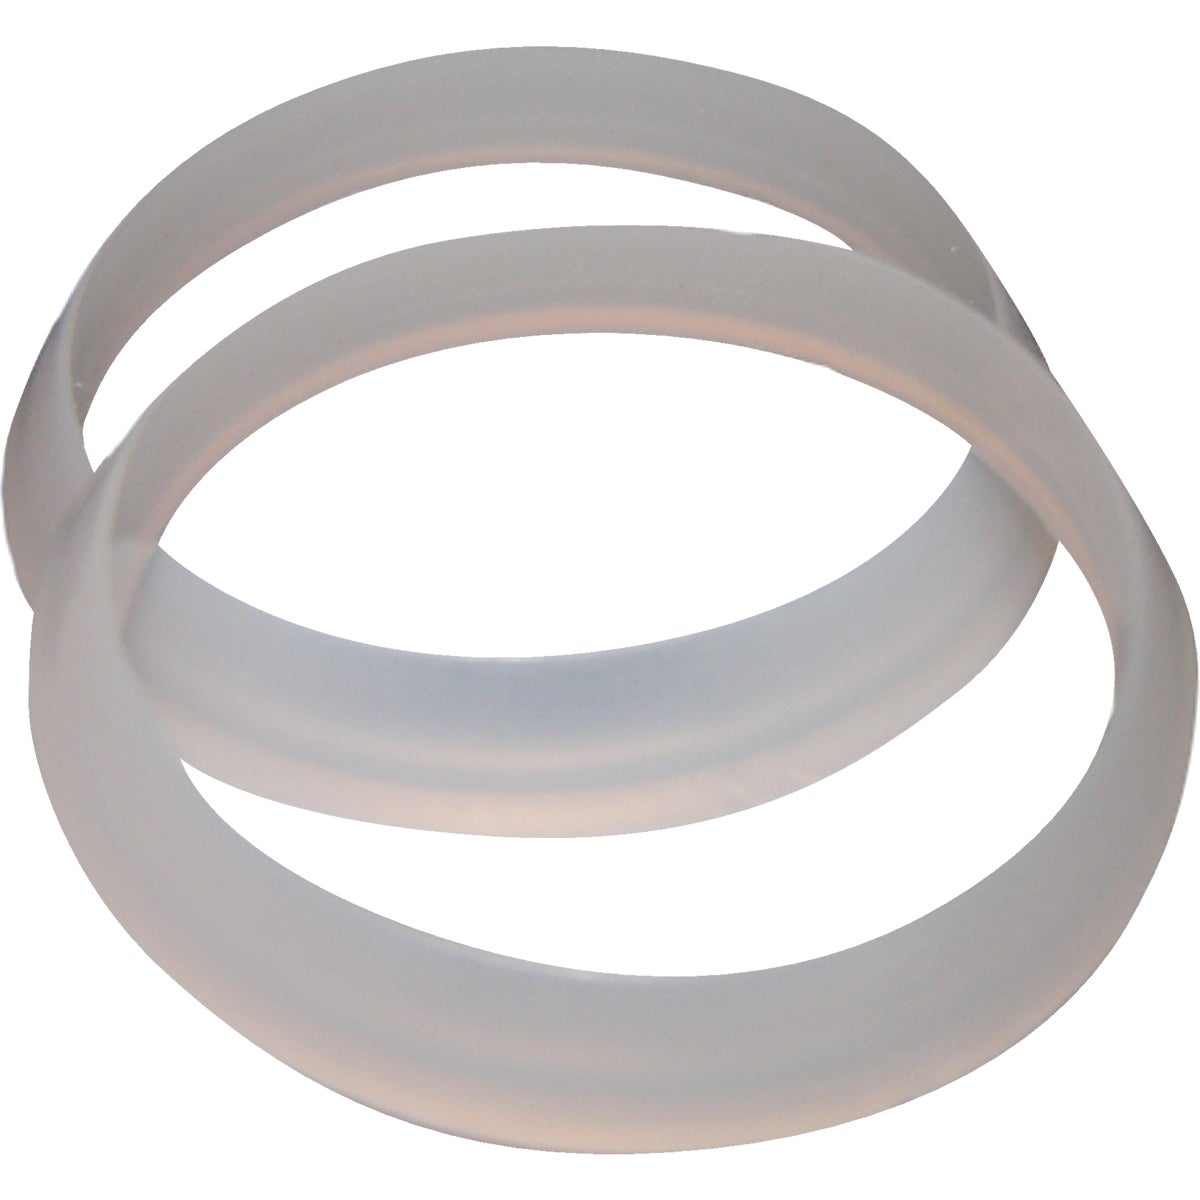 Lasco 1-1/4 In. White Plastic/Poly Slip Joint Washer (2-Pack)